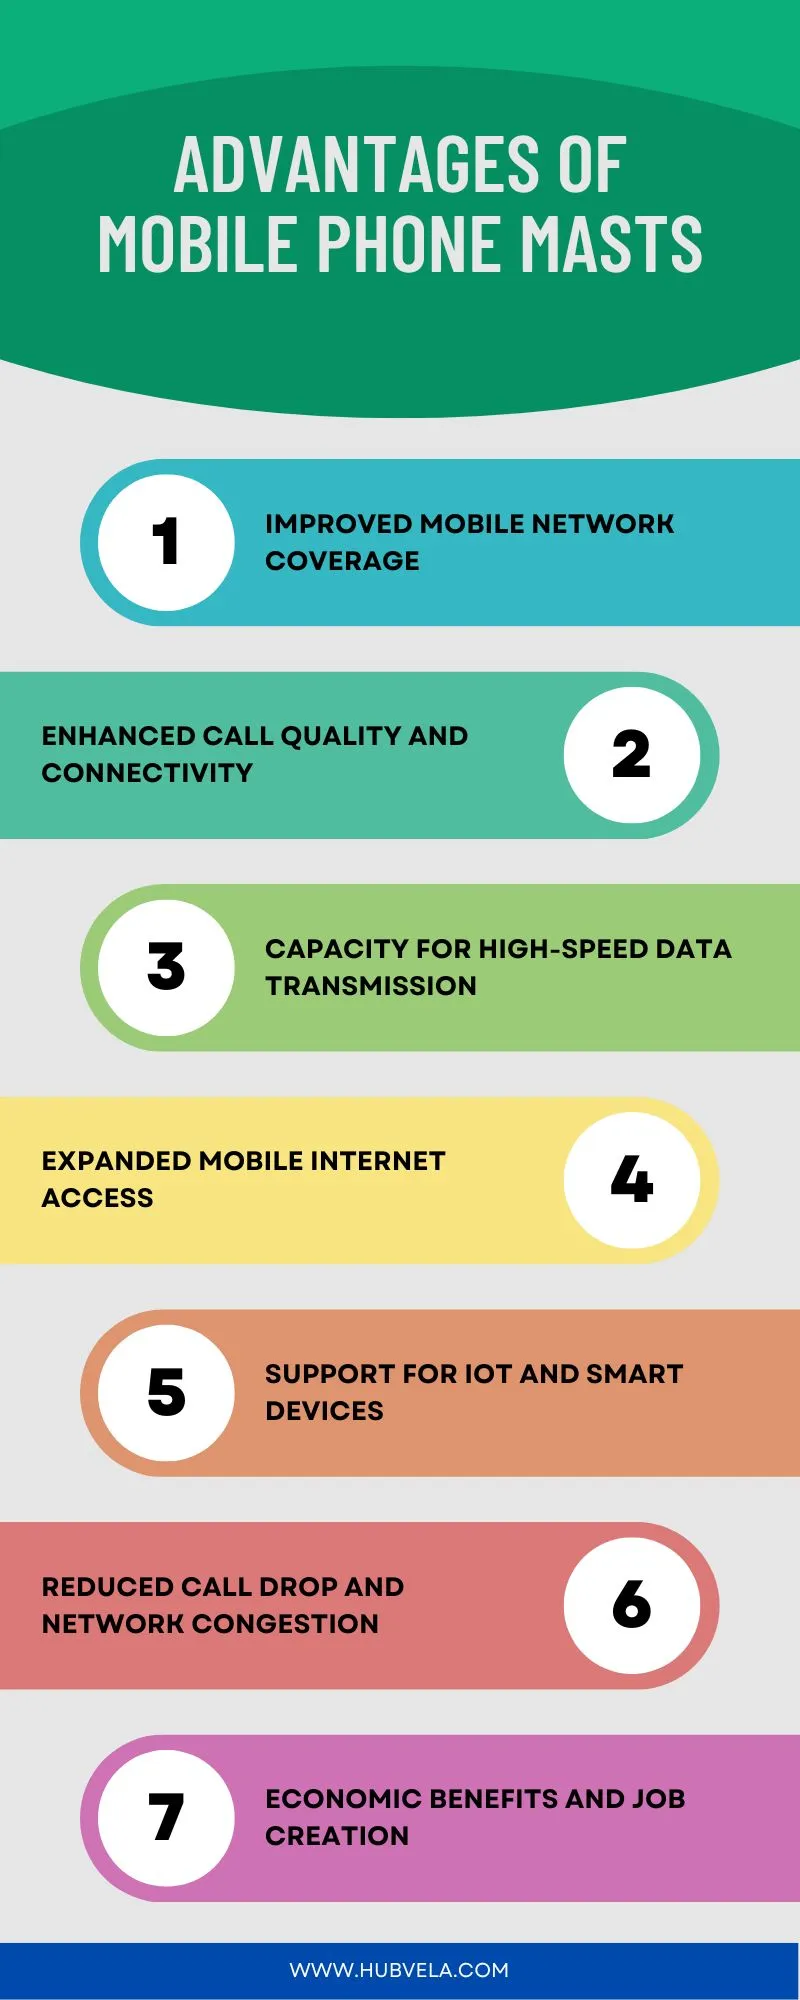 Advantages of Mobile Phone Masts Infographic